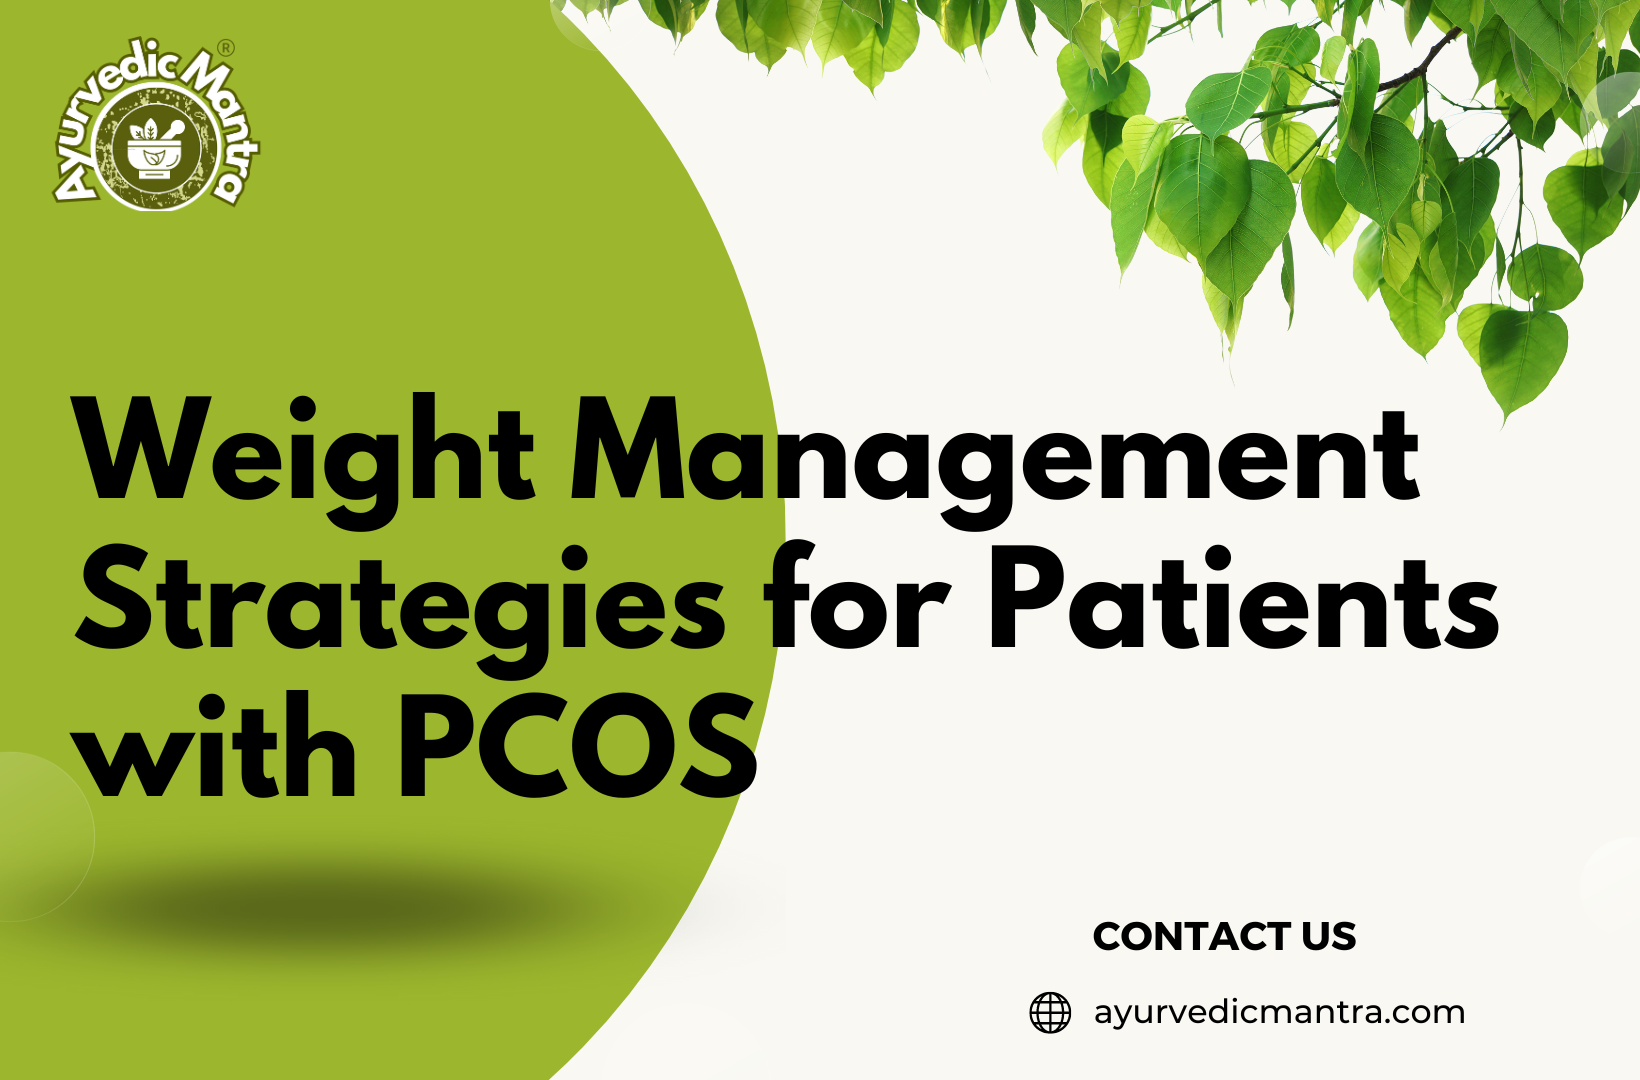 Weight Management Strategies for Patients with PCOS